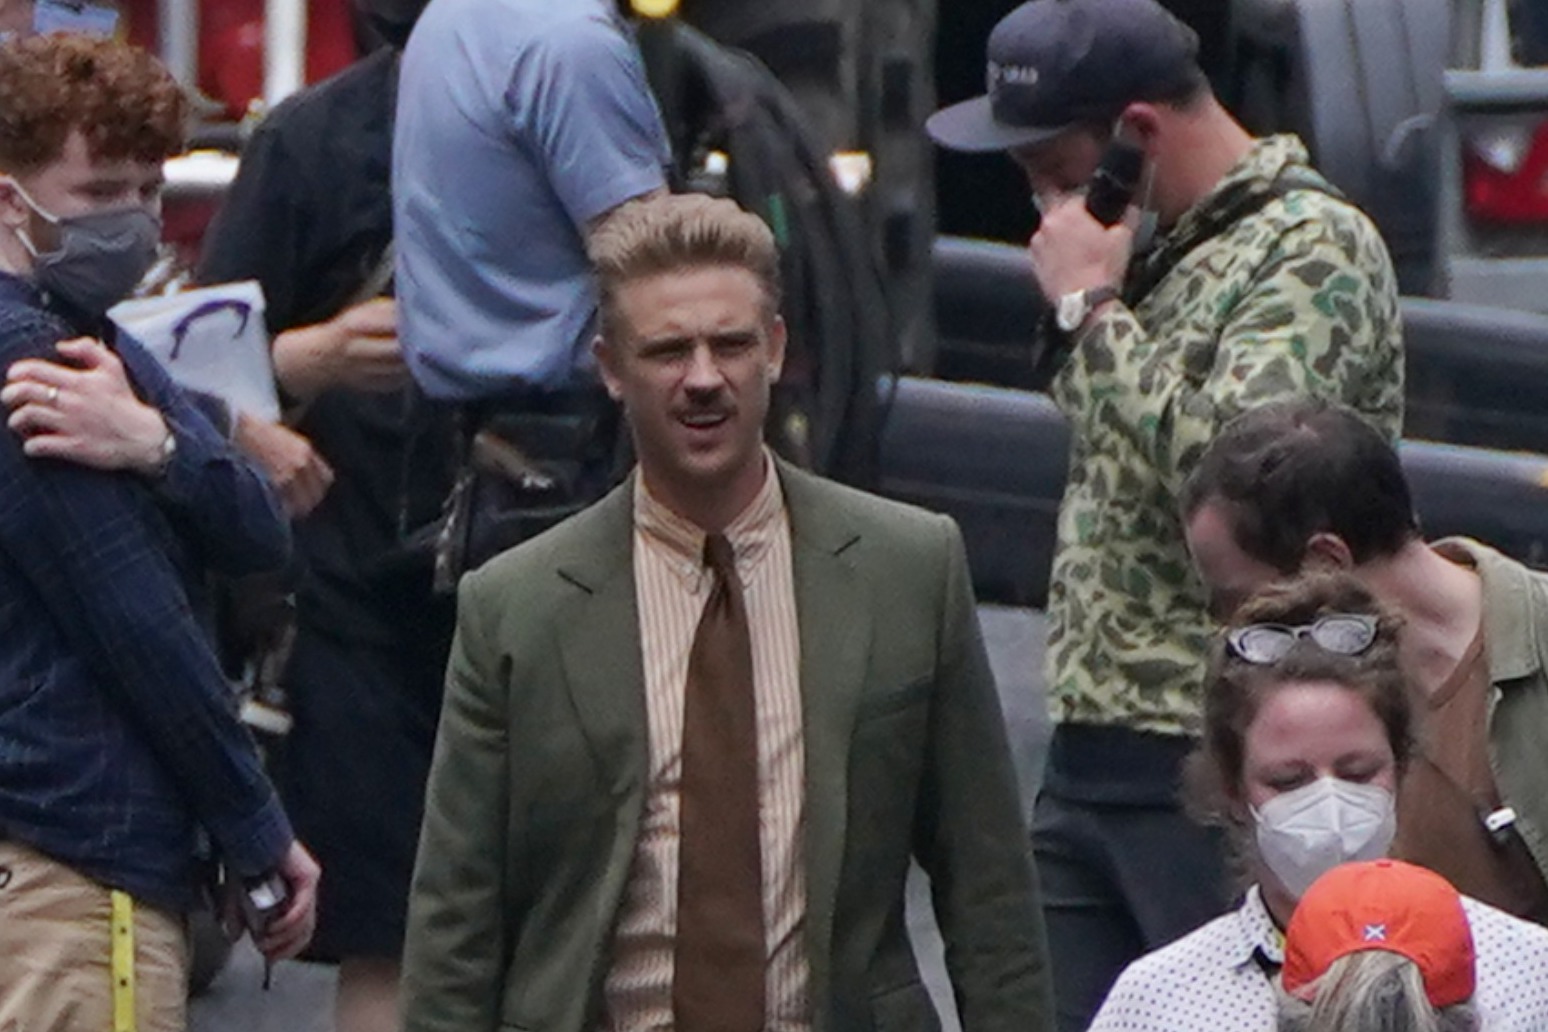 Indiana Jones actor Boyd Holbrook spotted on set in Glasgow 